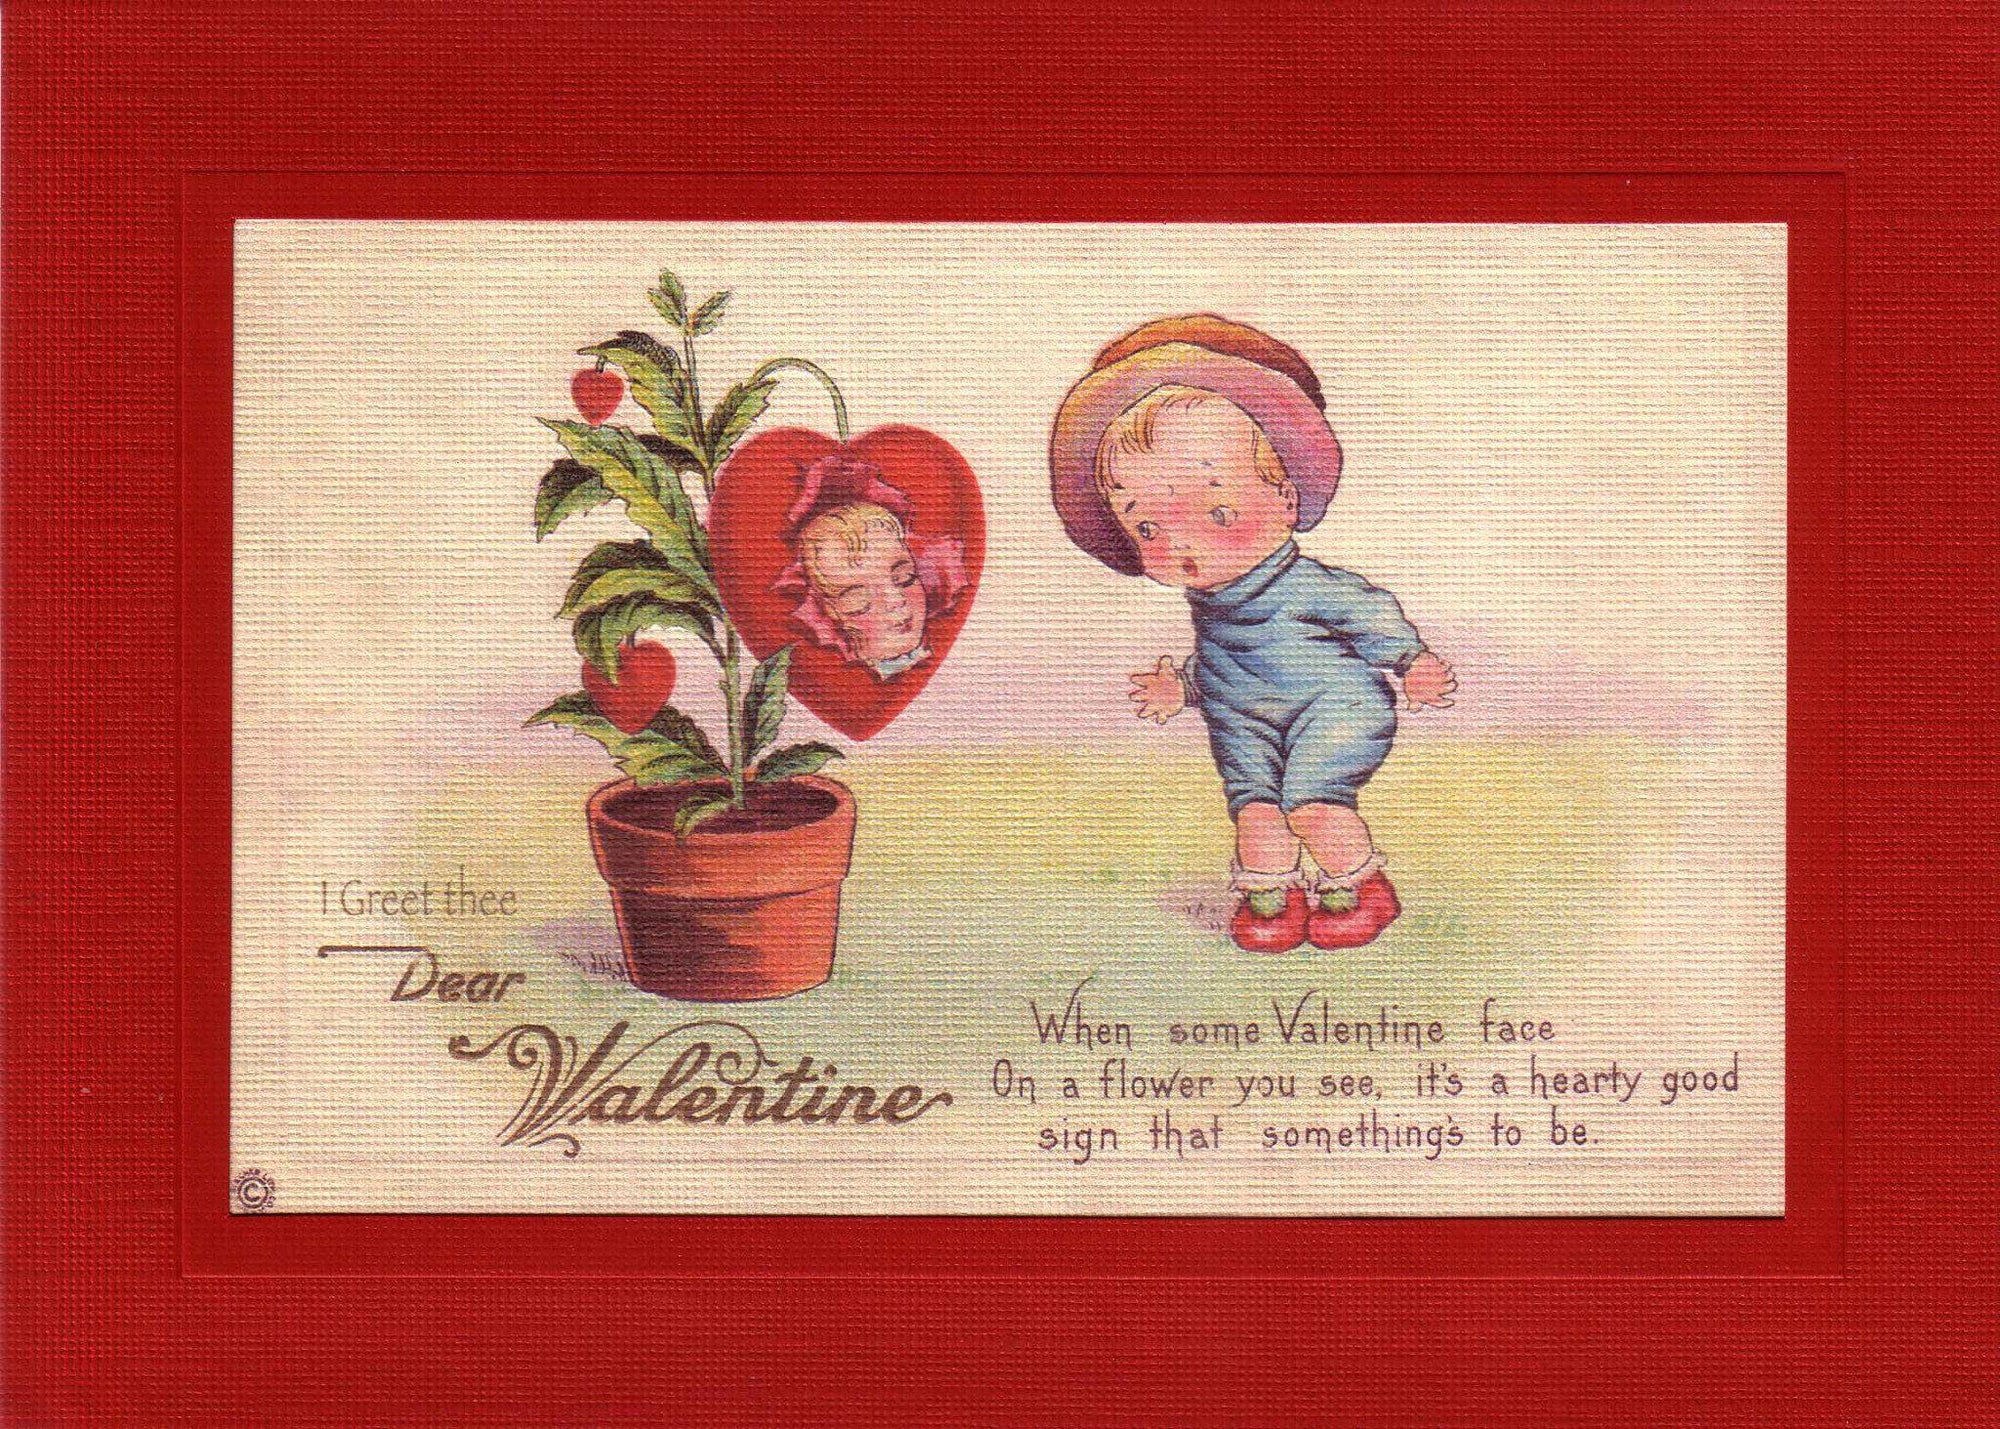 I Greet Thee Dear Valentine-Greetings from the Past-Plymouth Cards